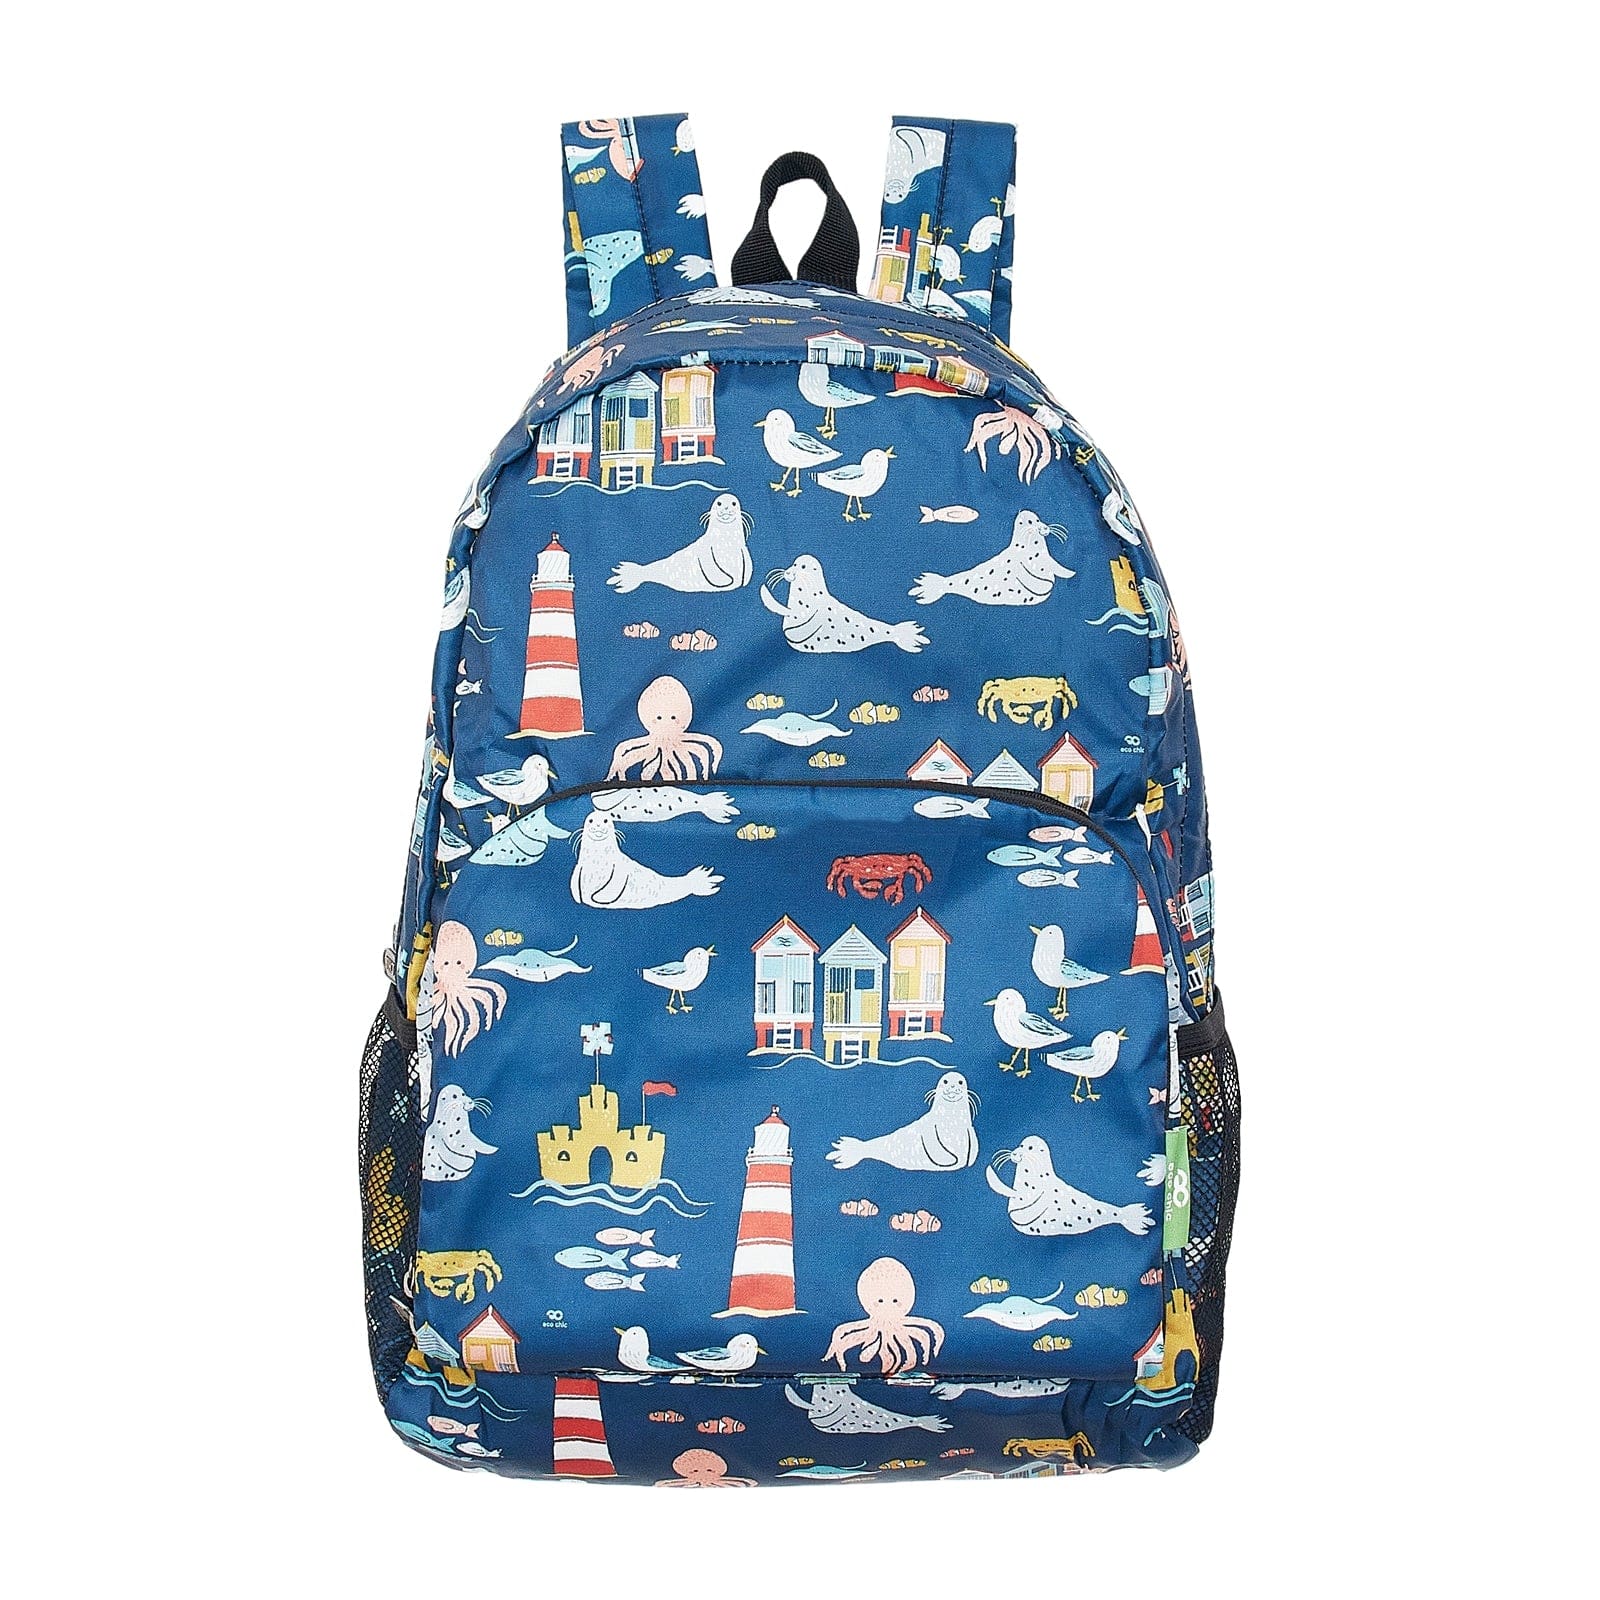 Eco Chic Navy Eco Chic Lightweight Foldable Backpack Seaside